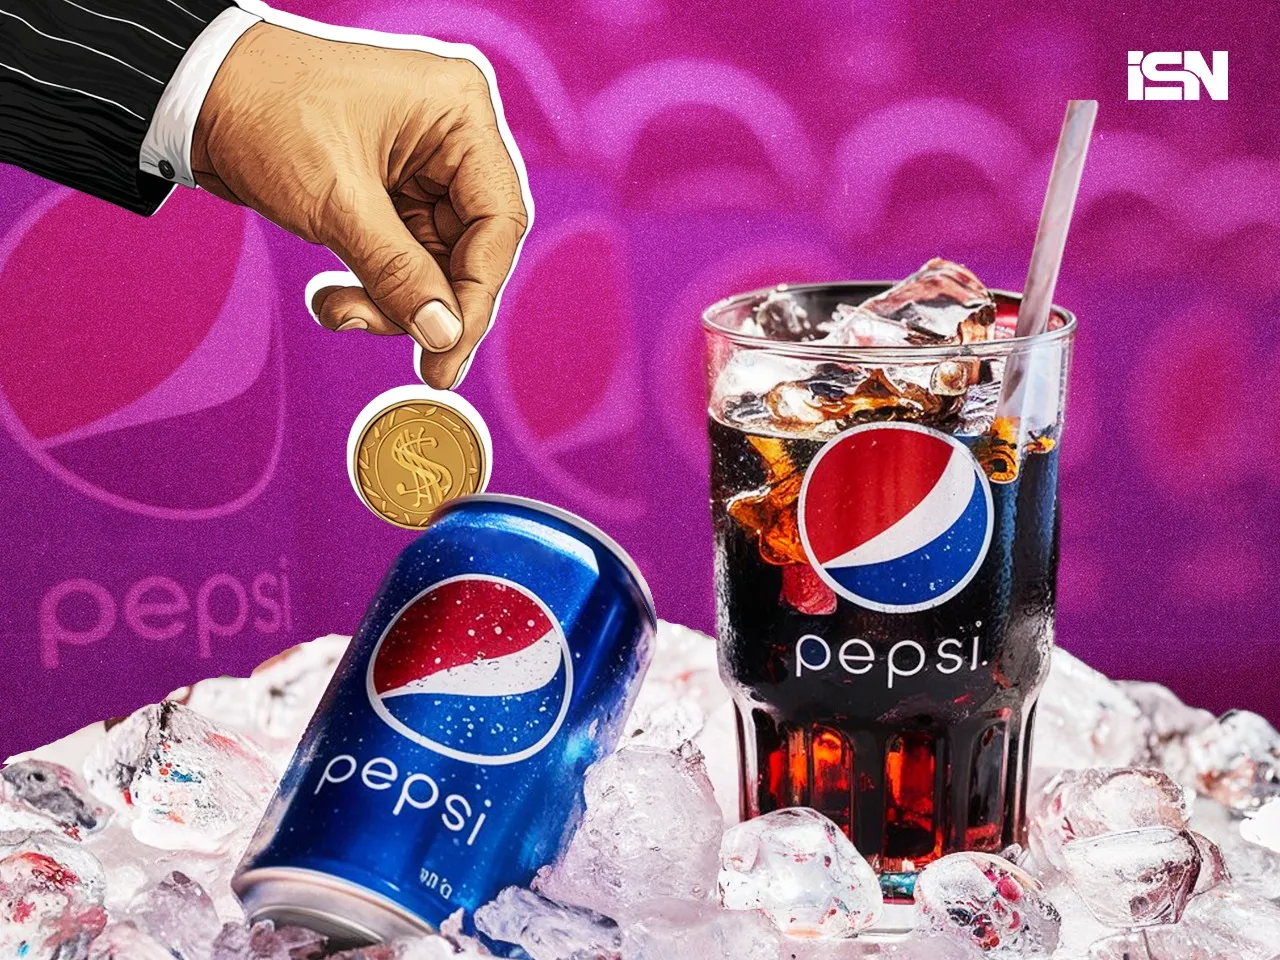 PepsiCo India to invest Rs 1,266 crore to set up flavour facility in Ujjain, Madhya Pradesh